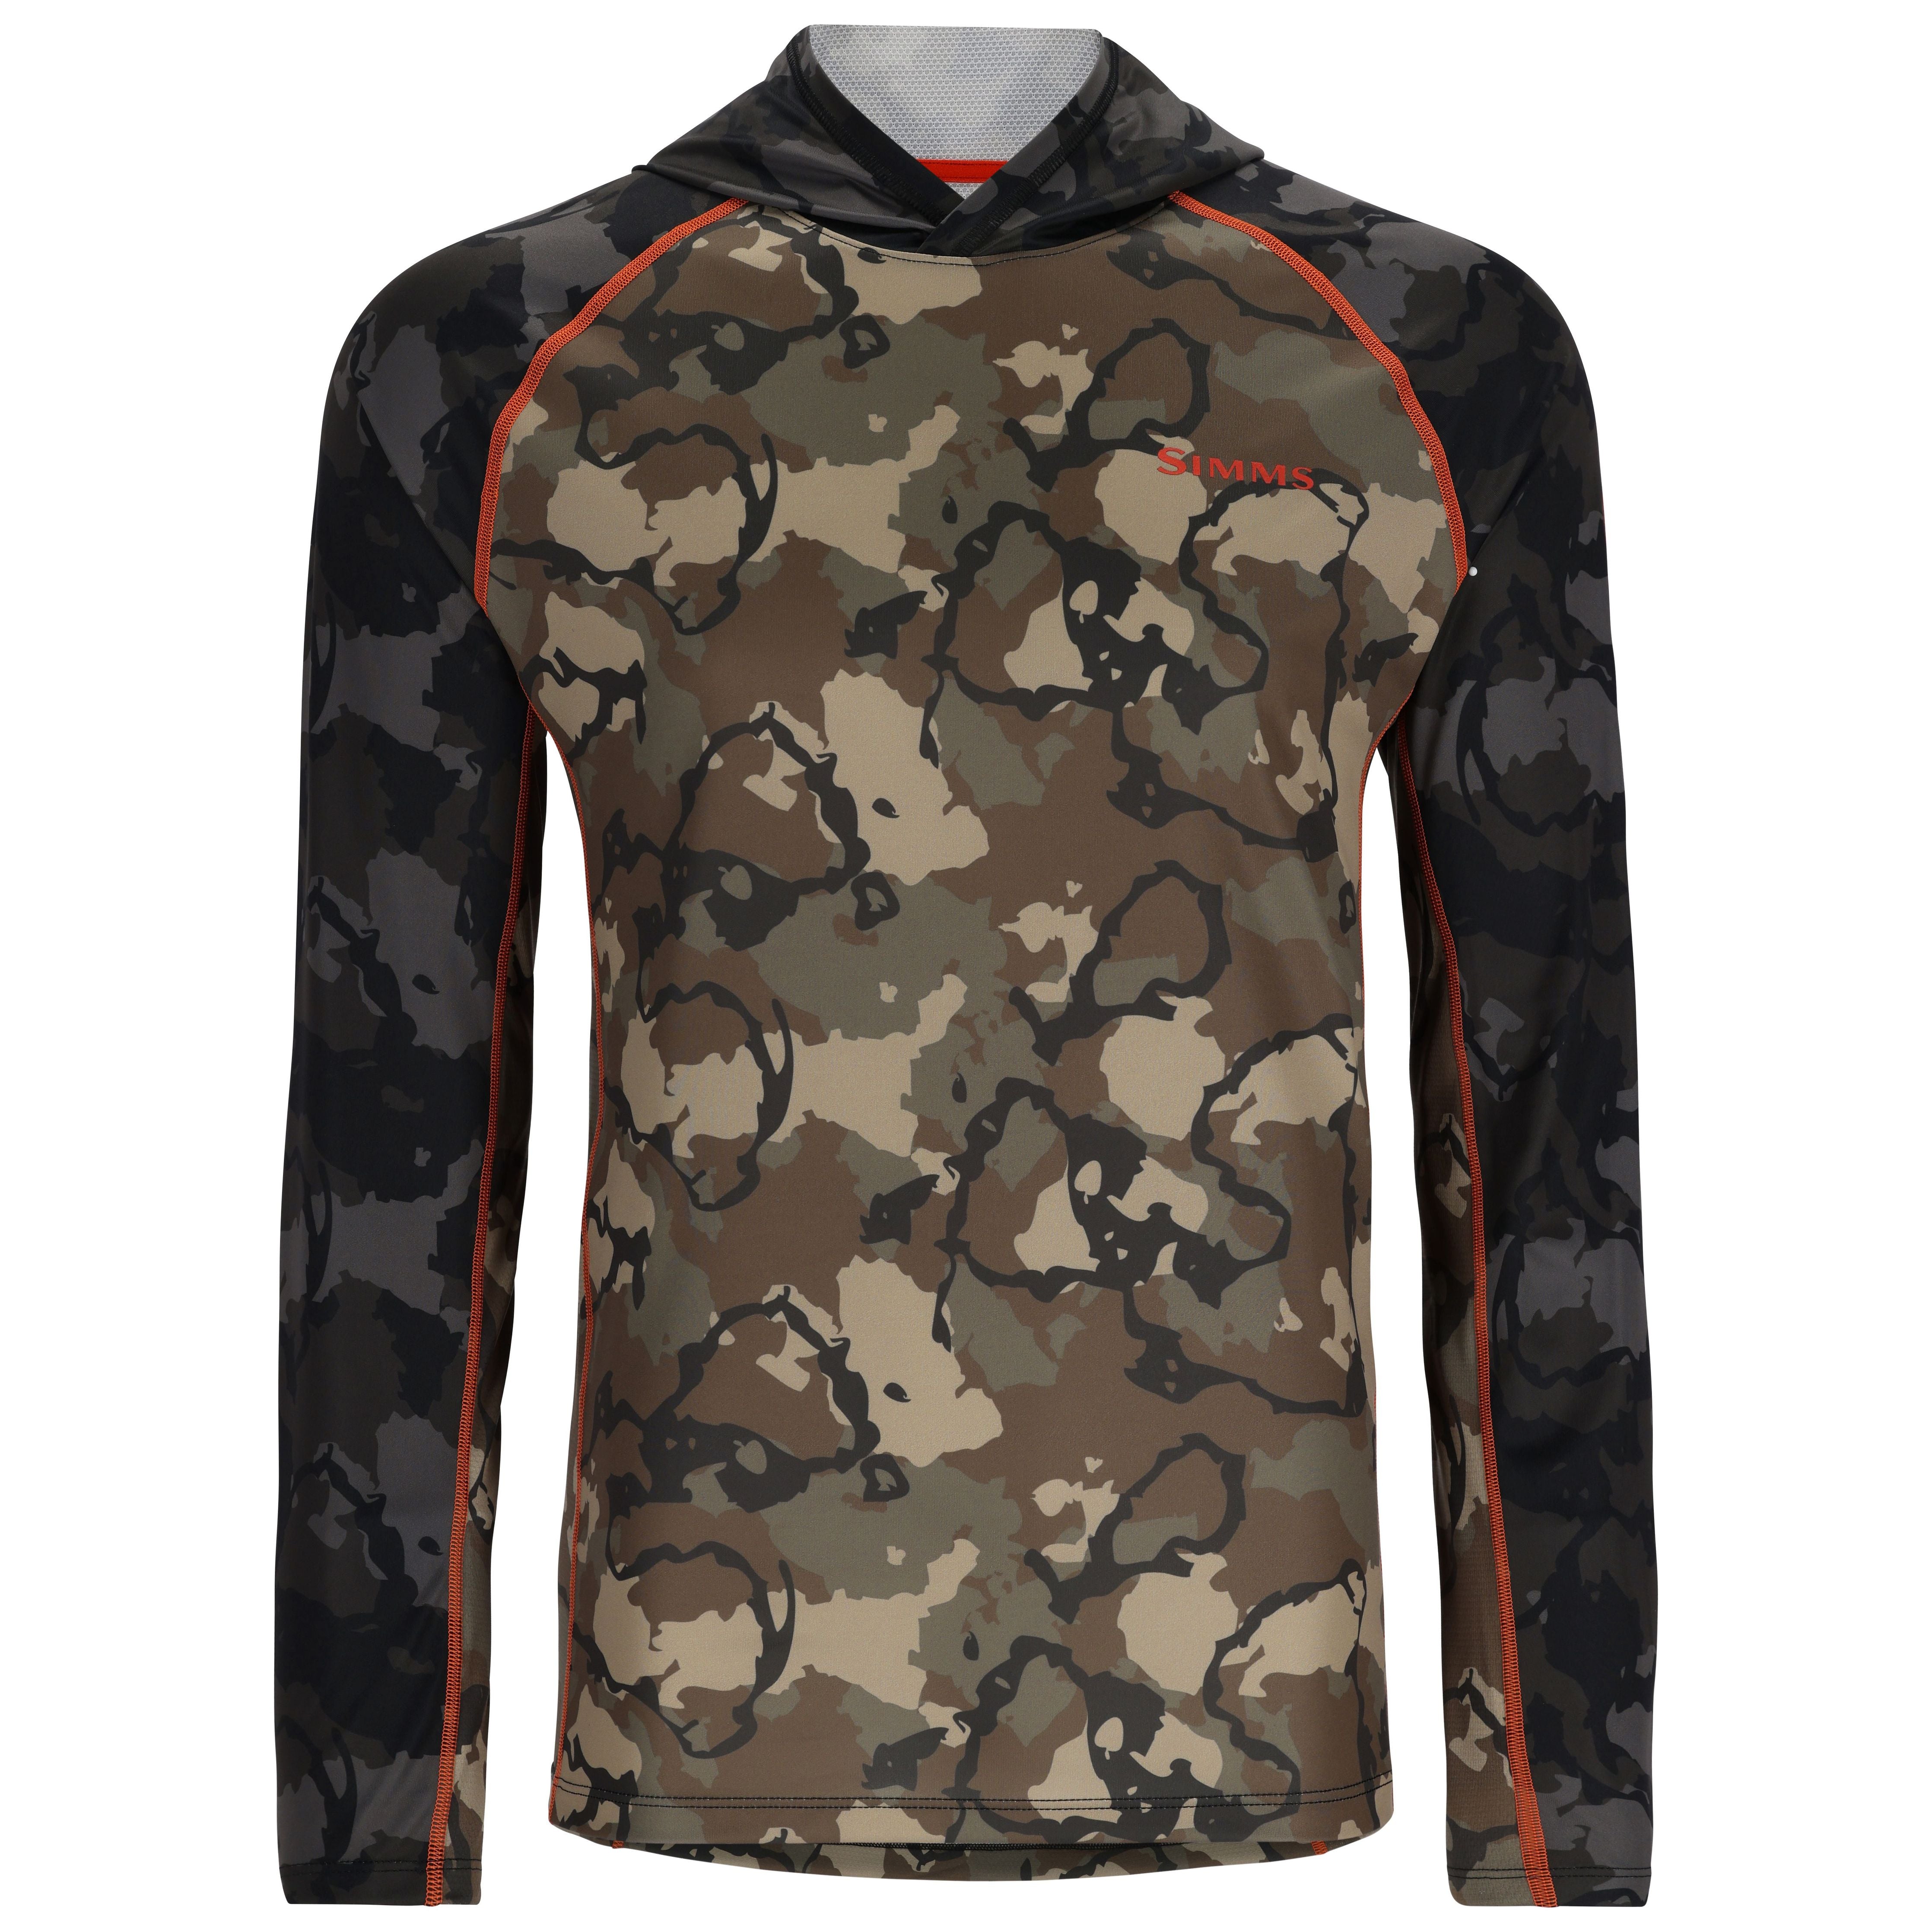 Simms Challenger Solar Hoody R Camo Olive Drab/R Camo Carbon Image 01